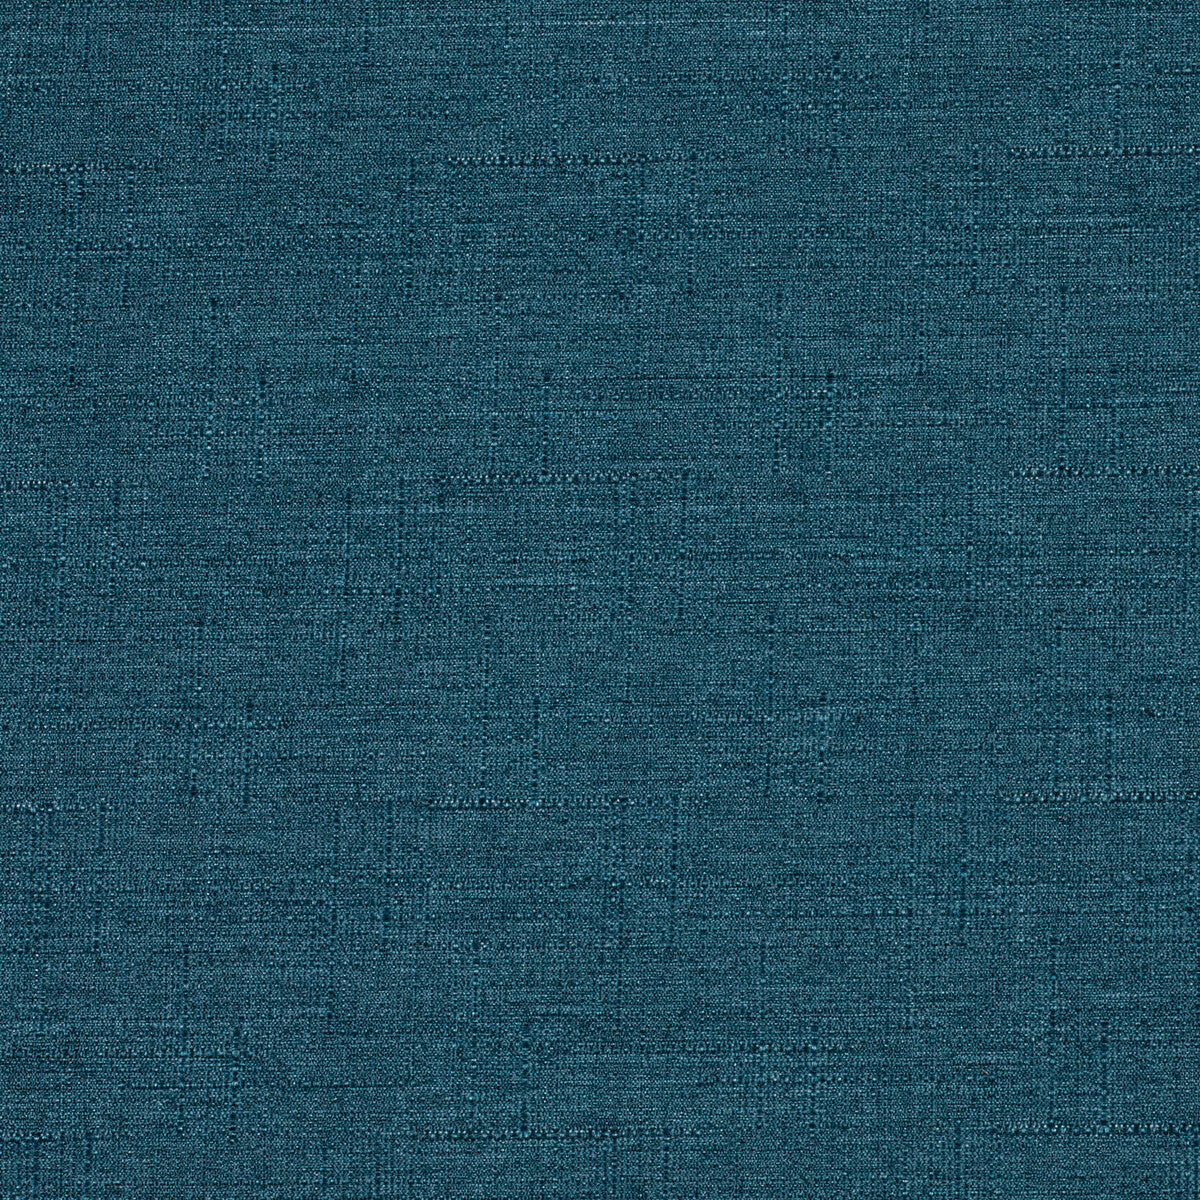 Kravet Contract fabric in 4321-35 color - pattern 4321.35.0 - by Kravet Contract